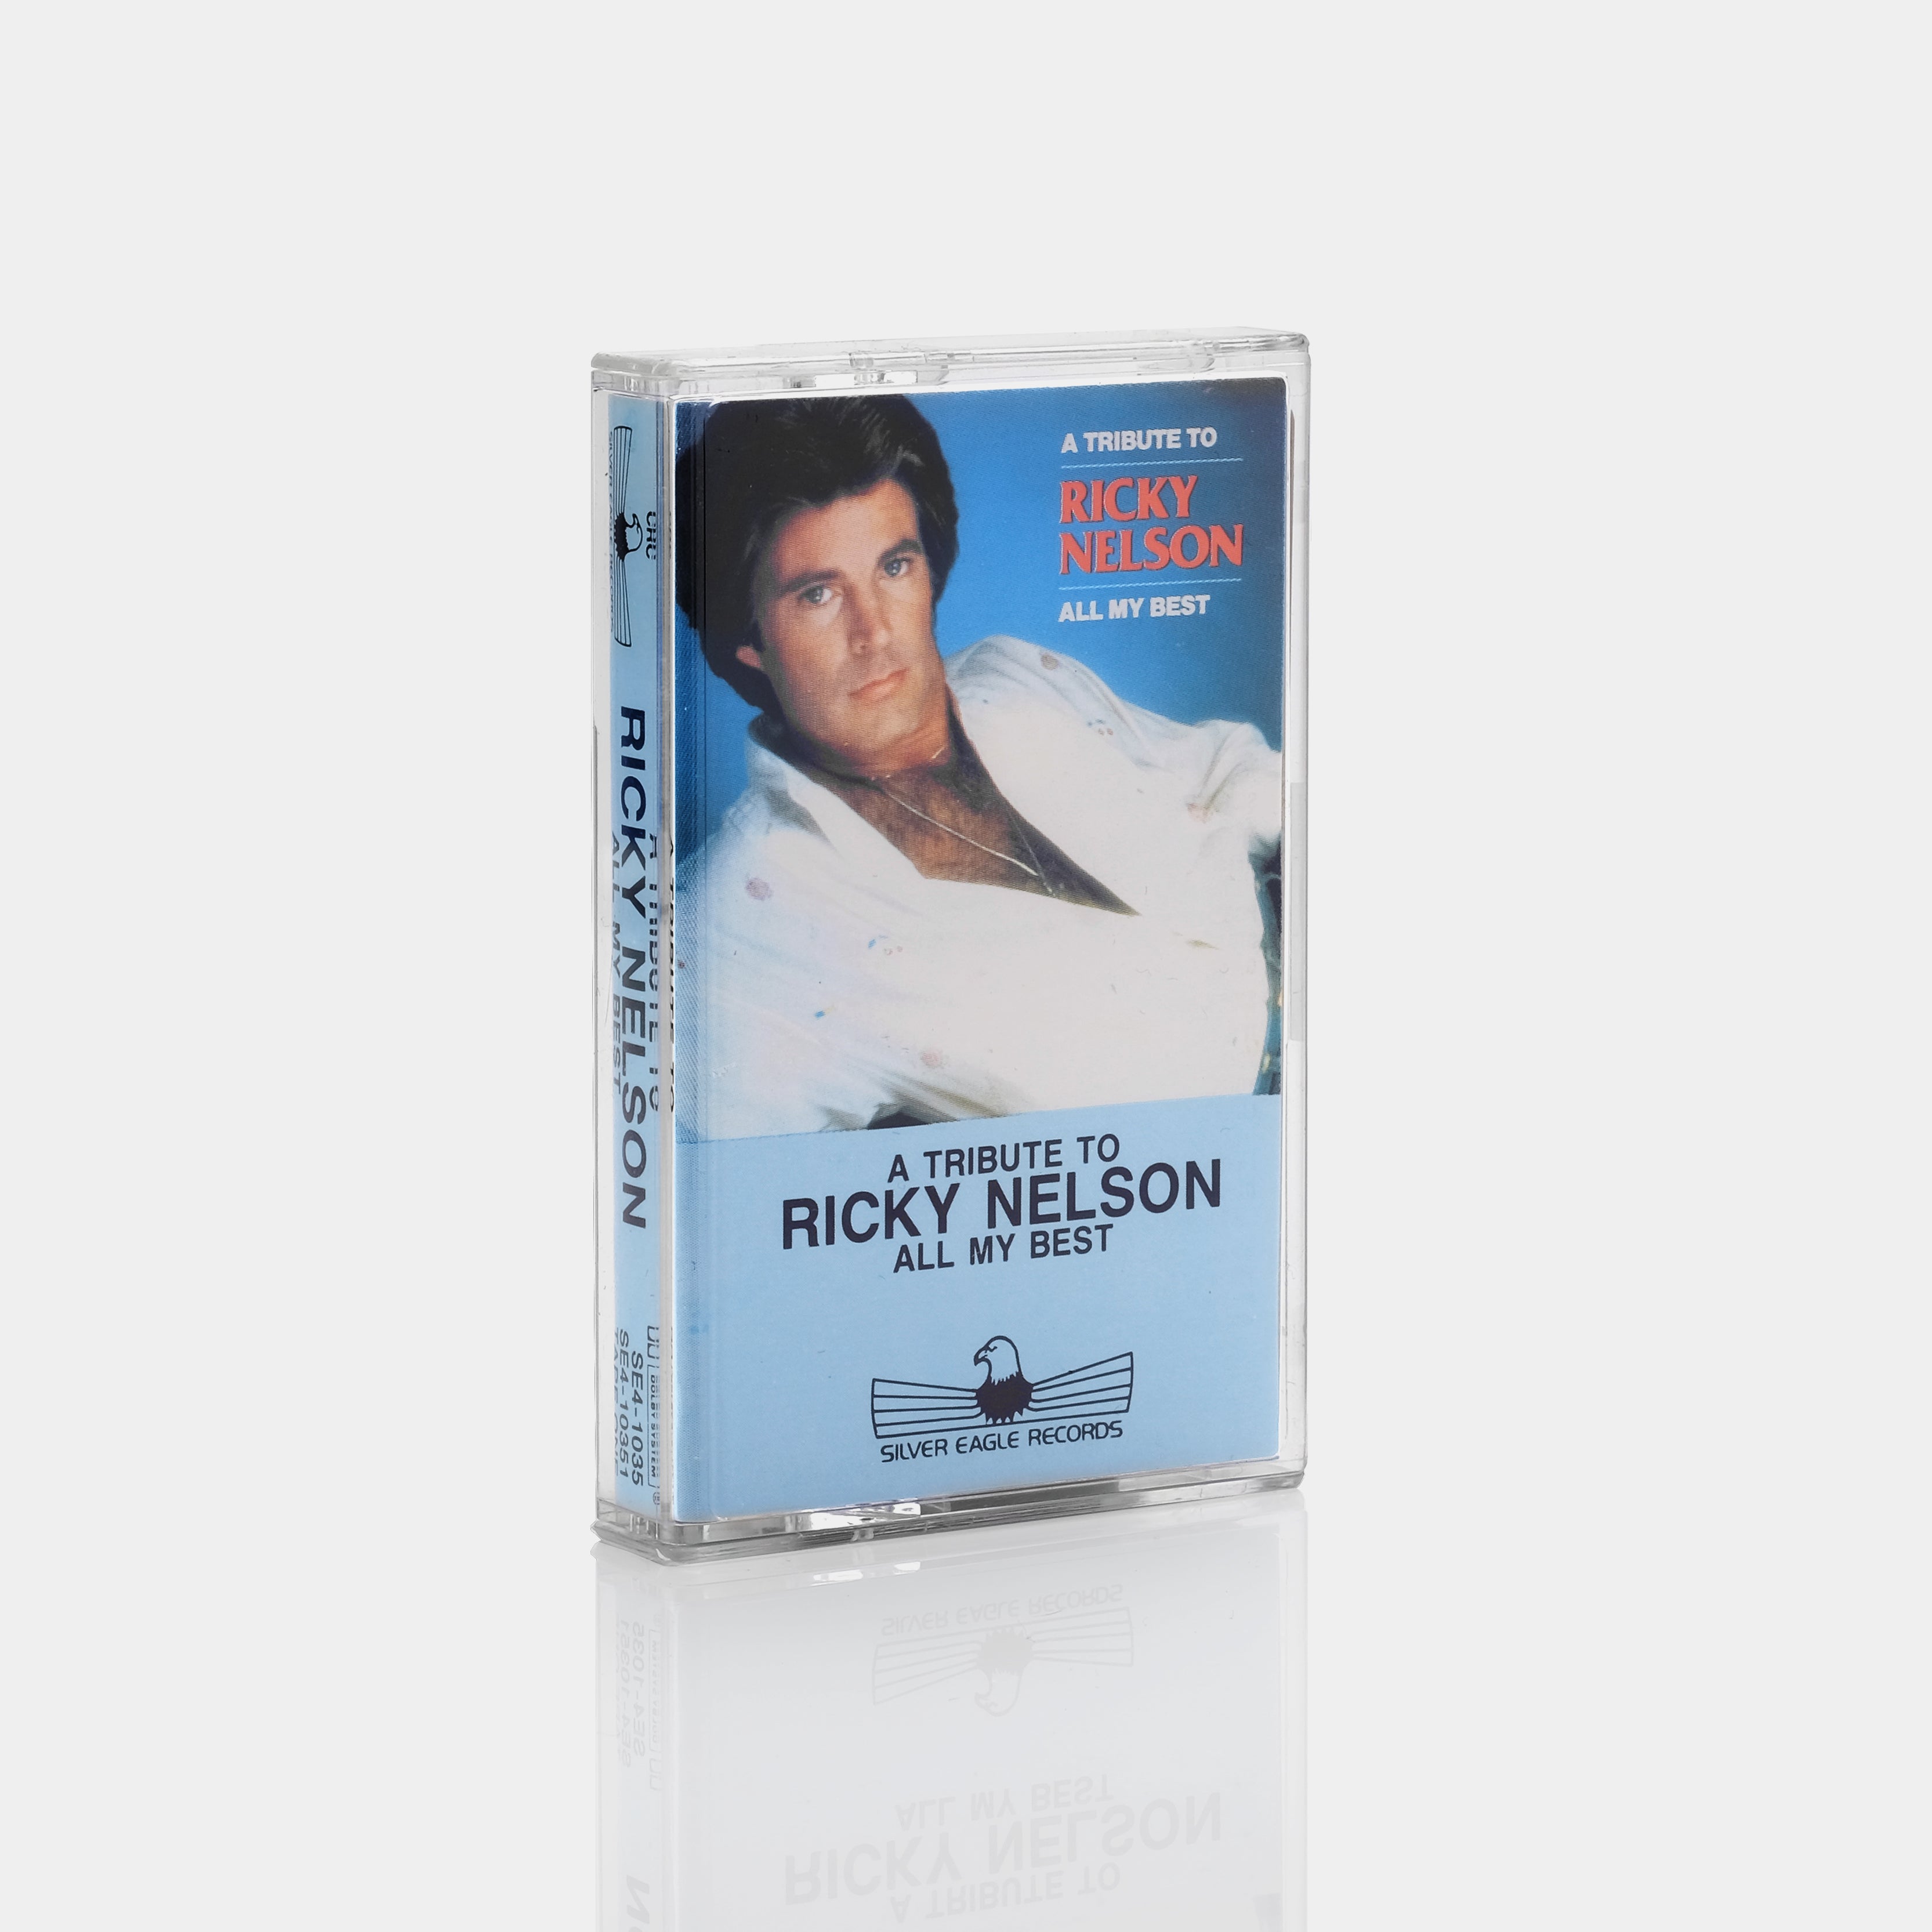 Ricky Nelson - A Tribute To Ricky Nelson, All My Best (Tape One) Cassette Tape